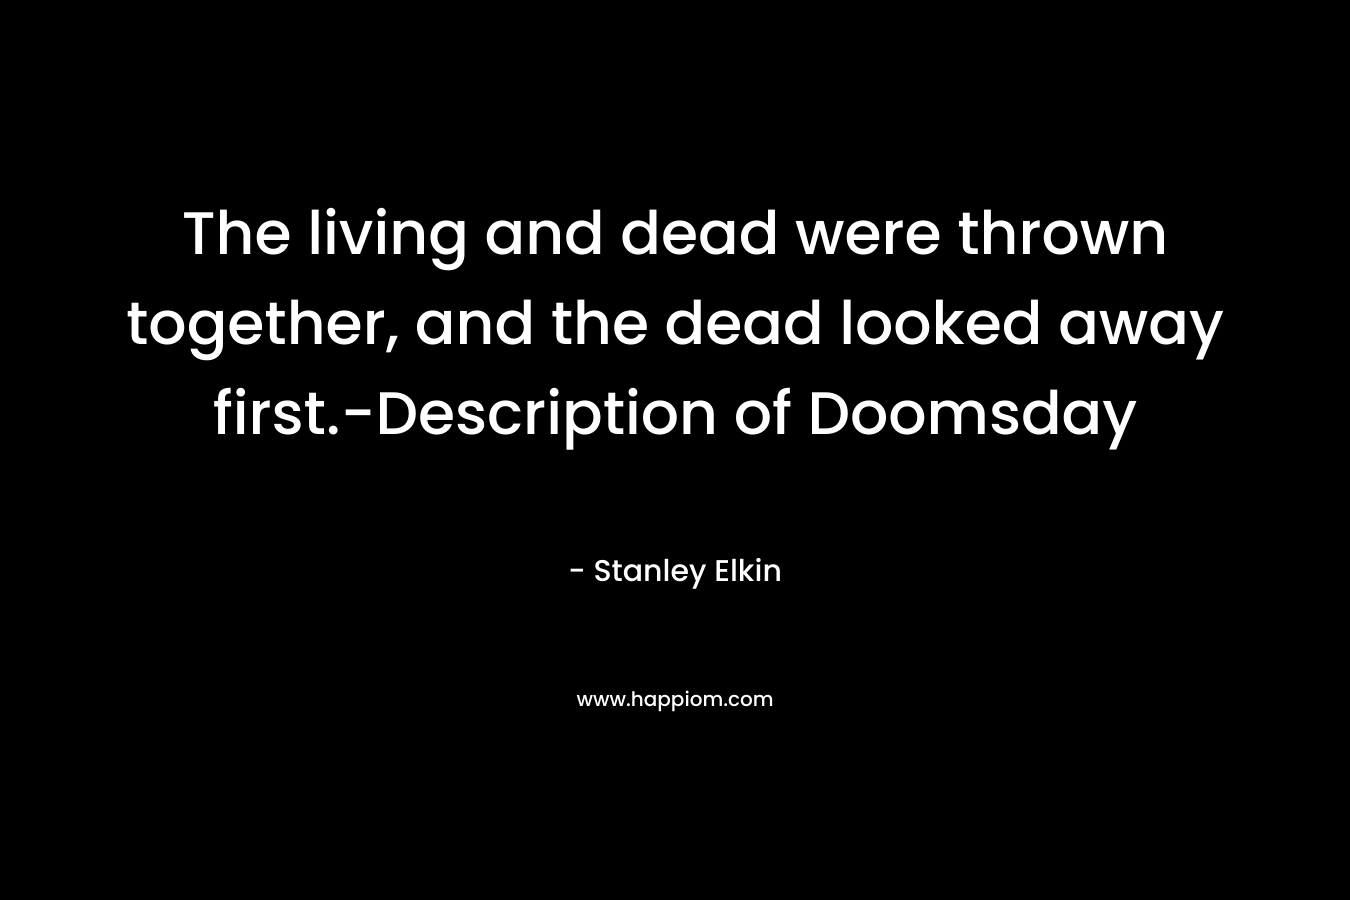 The living and dead were thrown together, and the dead looked away first.-Description of Doomsday